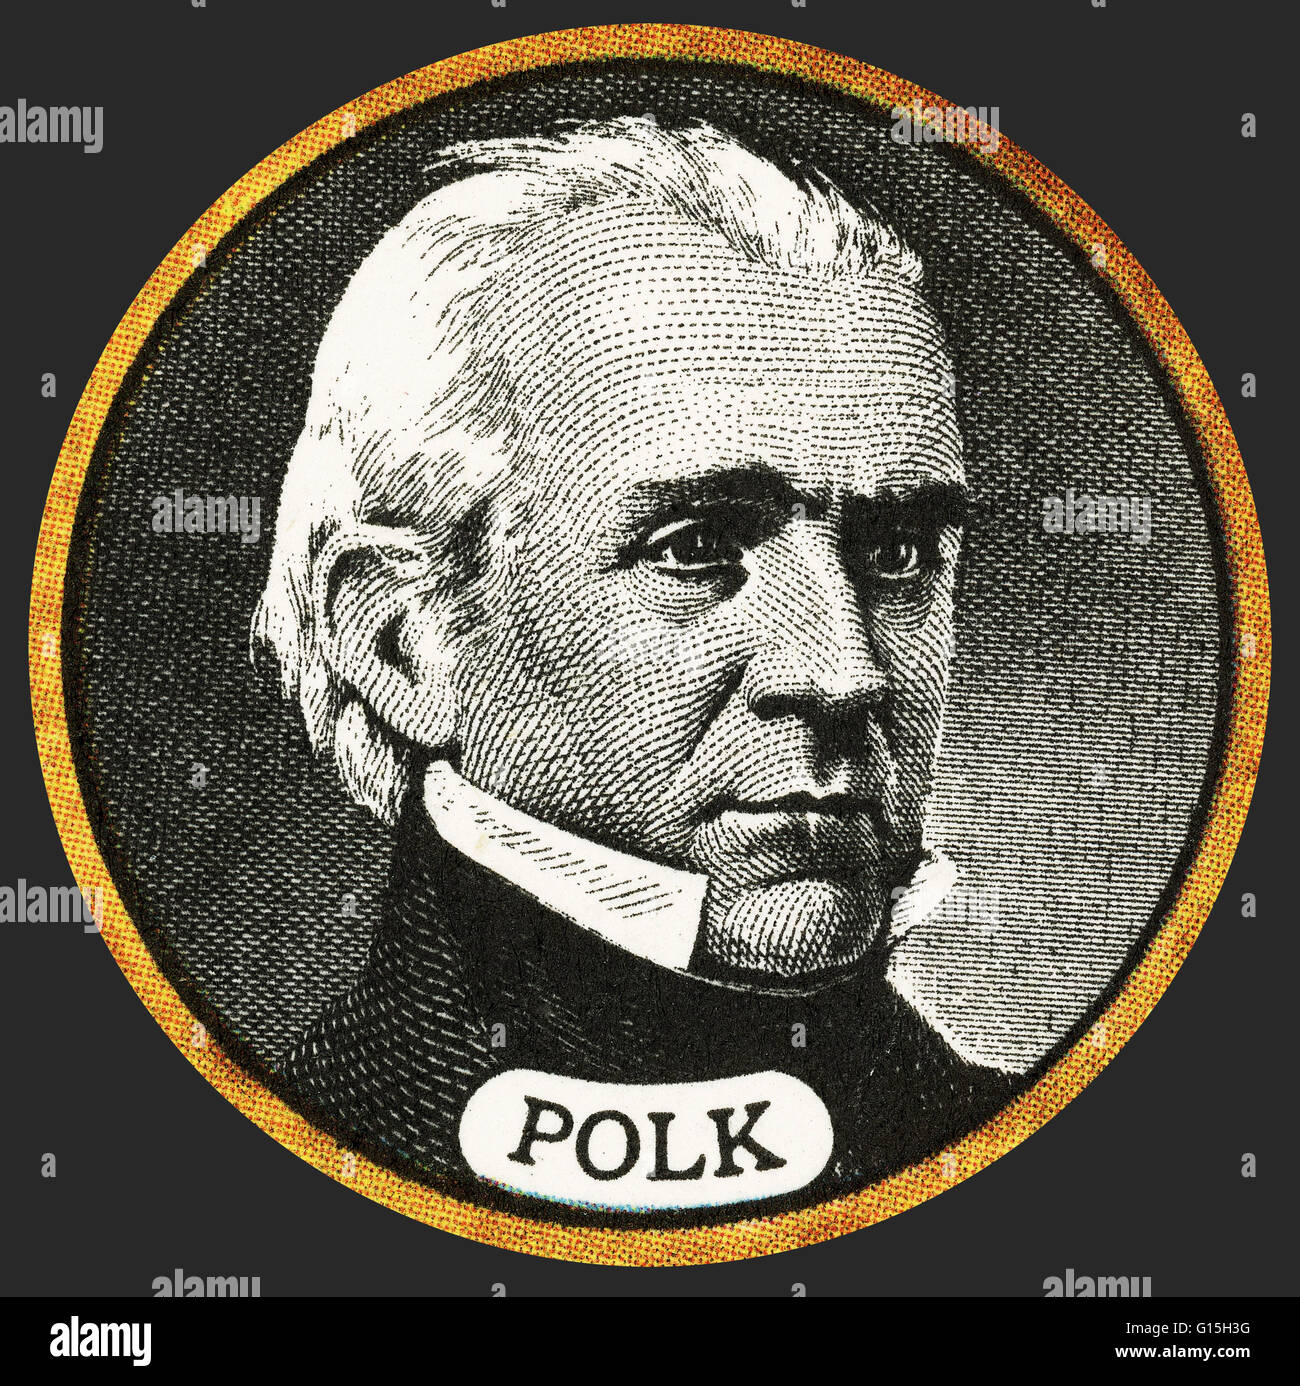 James Knox Polk (November 2, 1795 - June 15, 1849) was the 11th President of the United States (1845-1849). A Democrat, Polk served as the 17th Speaker of the House of Representatives (1835-1839) and Governor of Tennessee (1839-1841). He was the dark hors Stock Photo